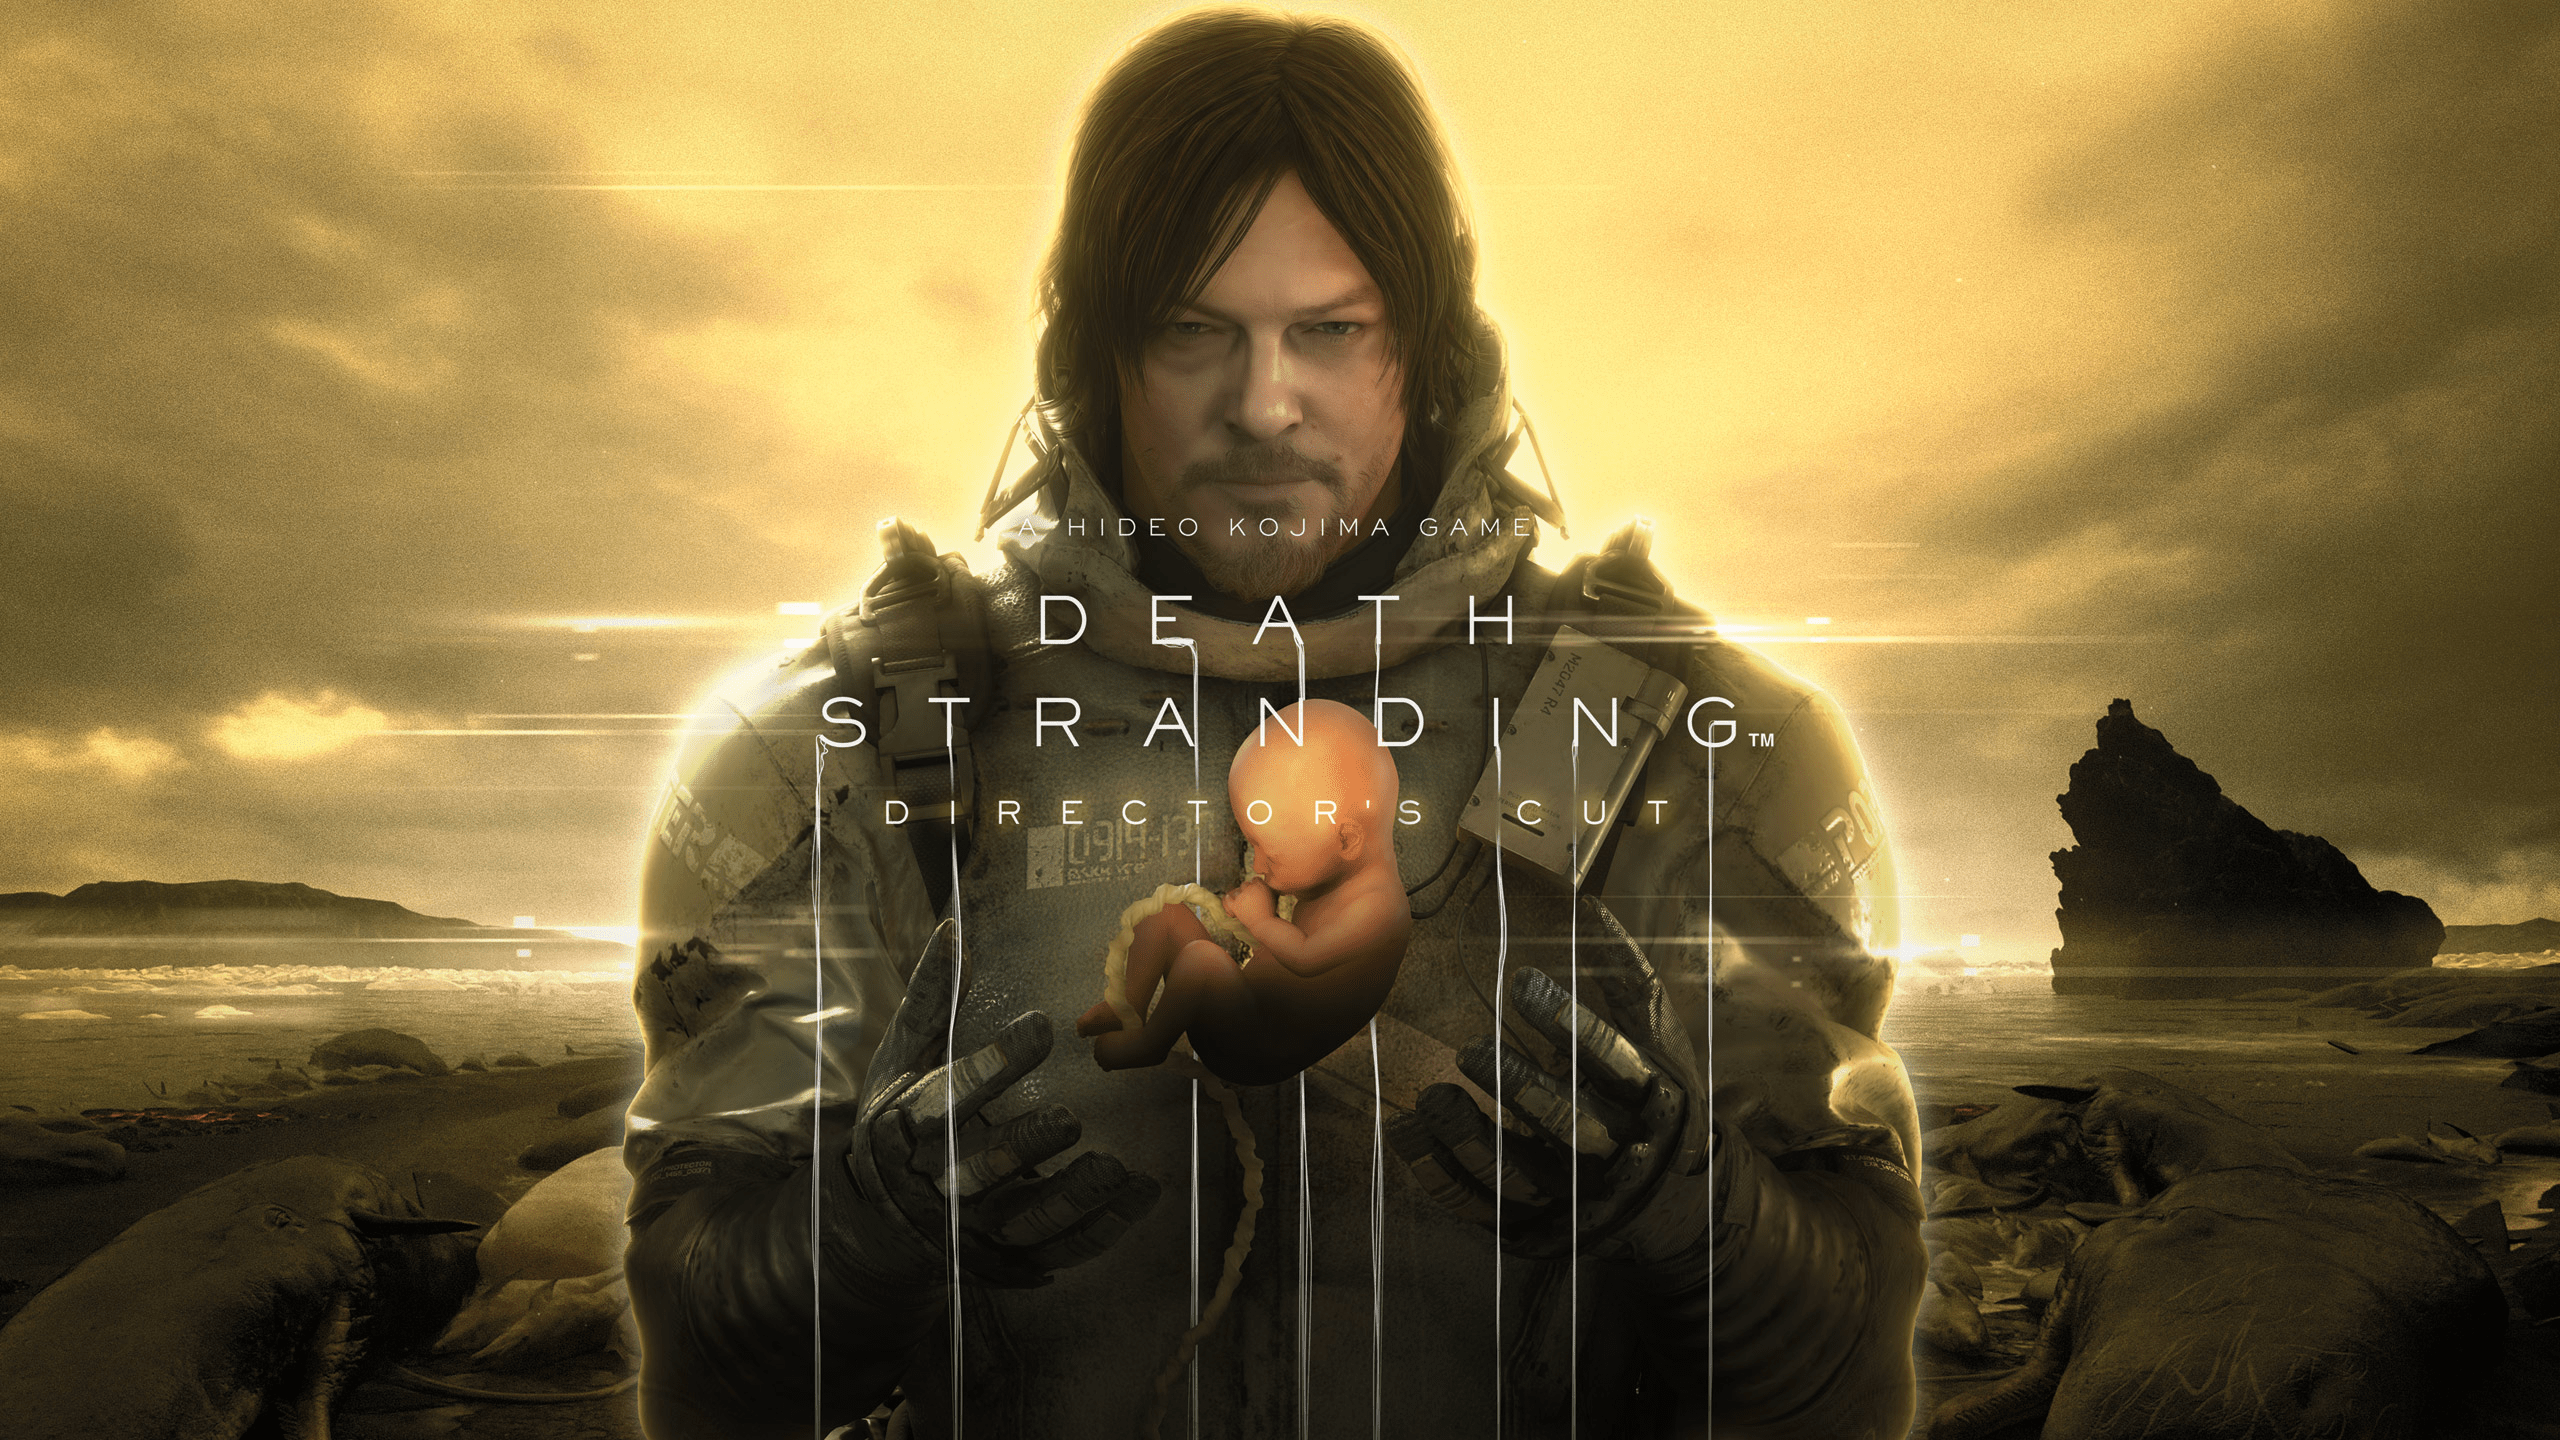 505 GAMES TO PUBLISH KOJIMA PRODUCTIONS’ DEATH STRANDING DIRECTOR’S CUT ON iPHONE AND iPAD DEVICES